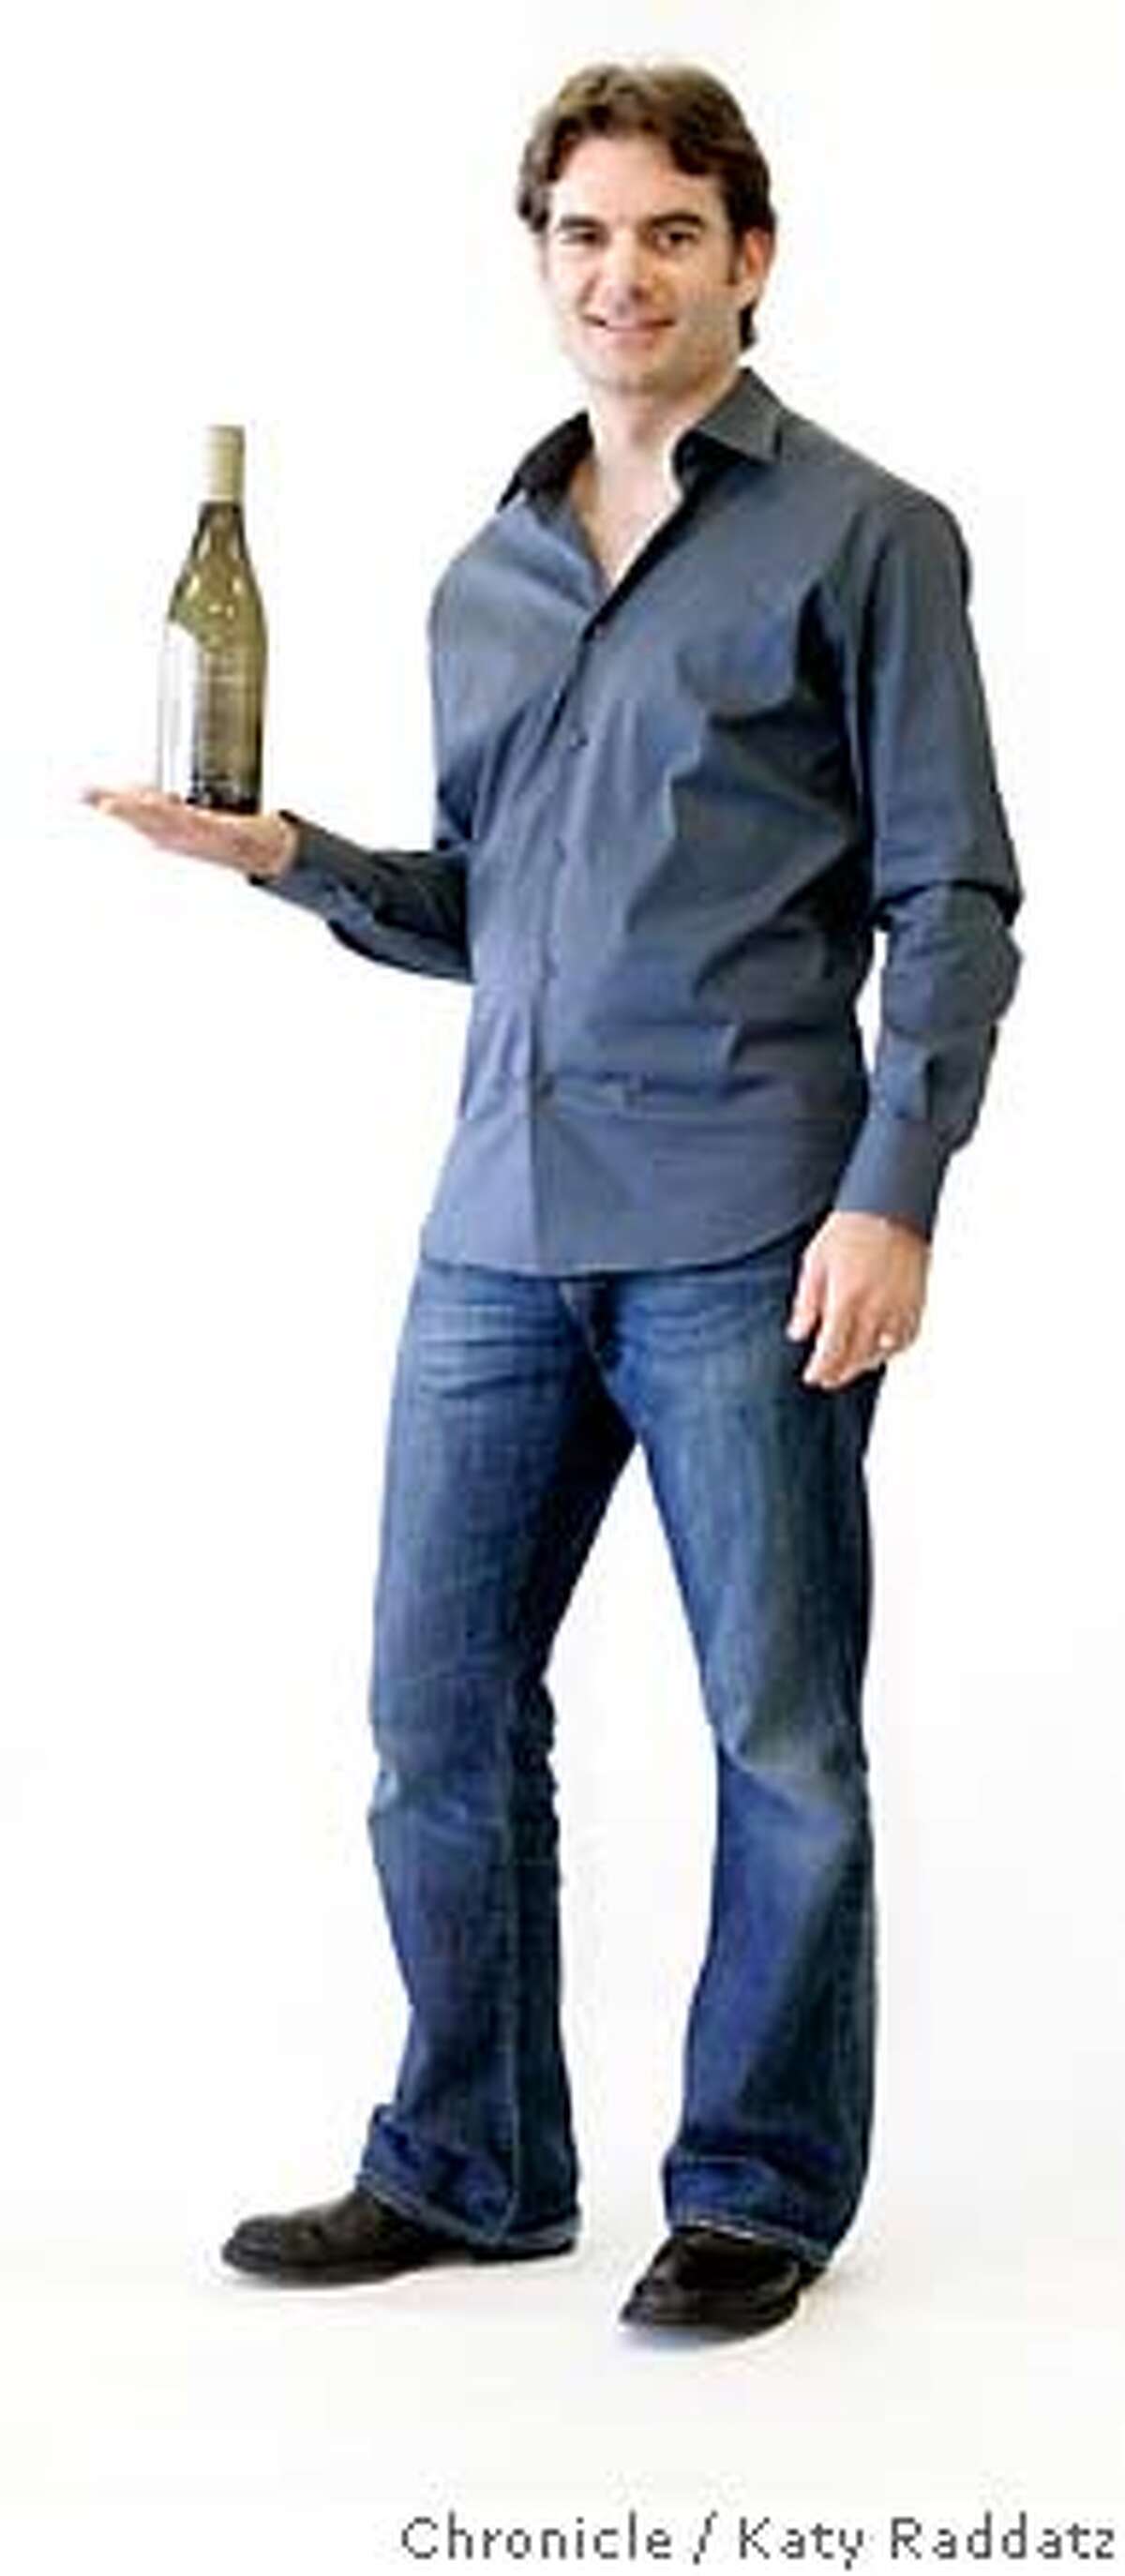 UNCORKED25_016_RAD.jpg SHOWN: Jeff Gordon, famous NASCAR race car driver, now makes his own wine. He's shown holding a bottle of 2005 Carneros Chardonnay. These pictures were made in Sonoma, CA. on Sunday, April 22, 2007. (Katy Raddatz/The Chronicle) **Jeff Gordon, Carneros Chardonnay Mandatory credit for the photographer and the San Francisco Chronicle. No sales; mags out.